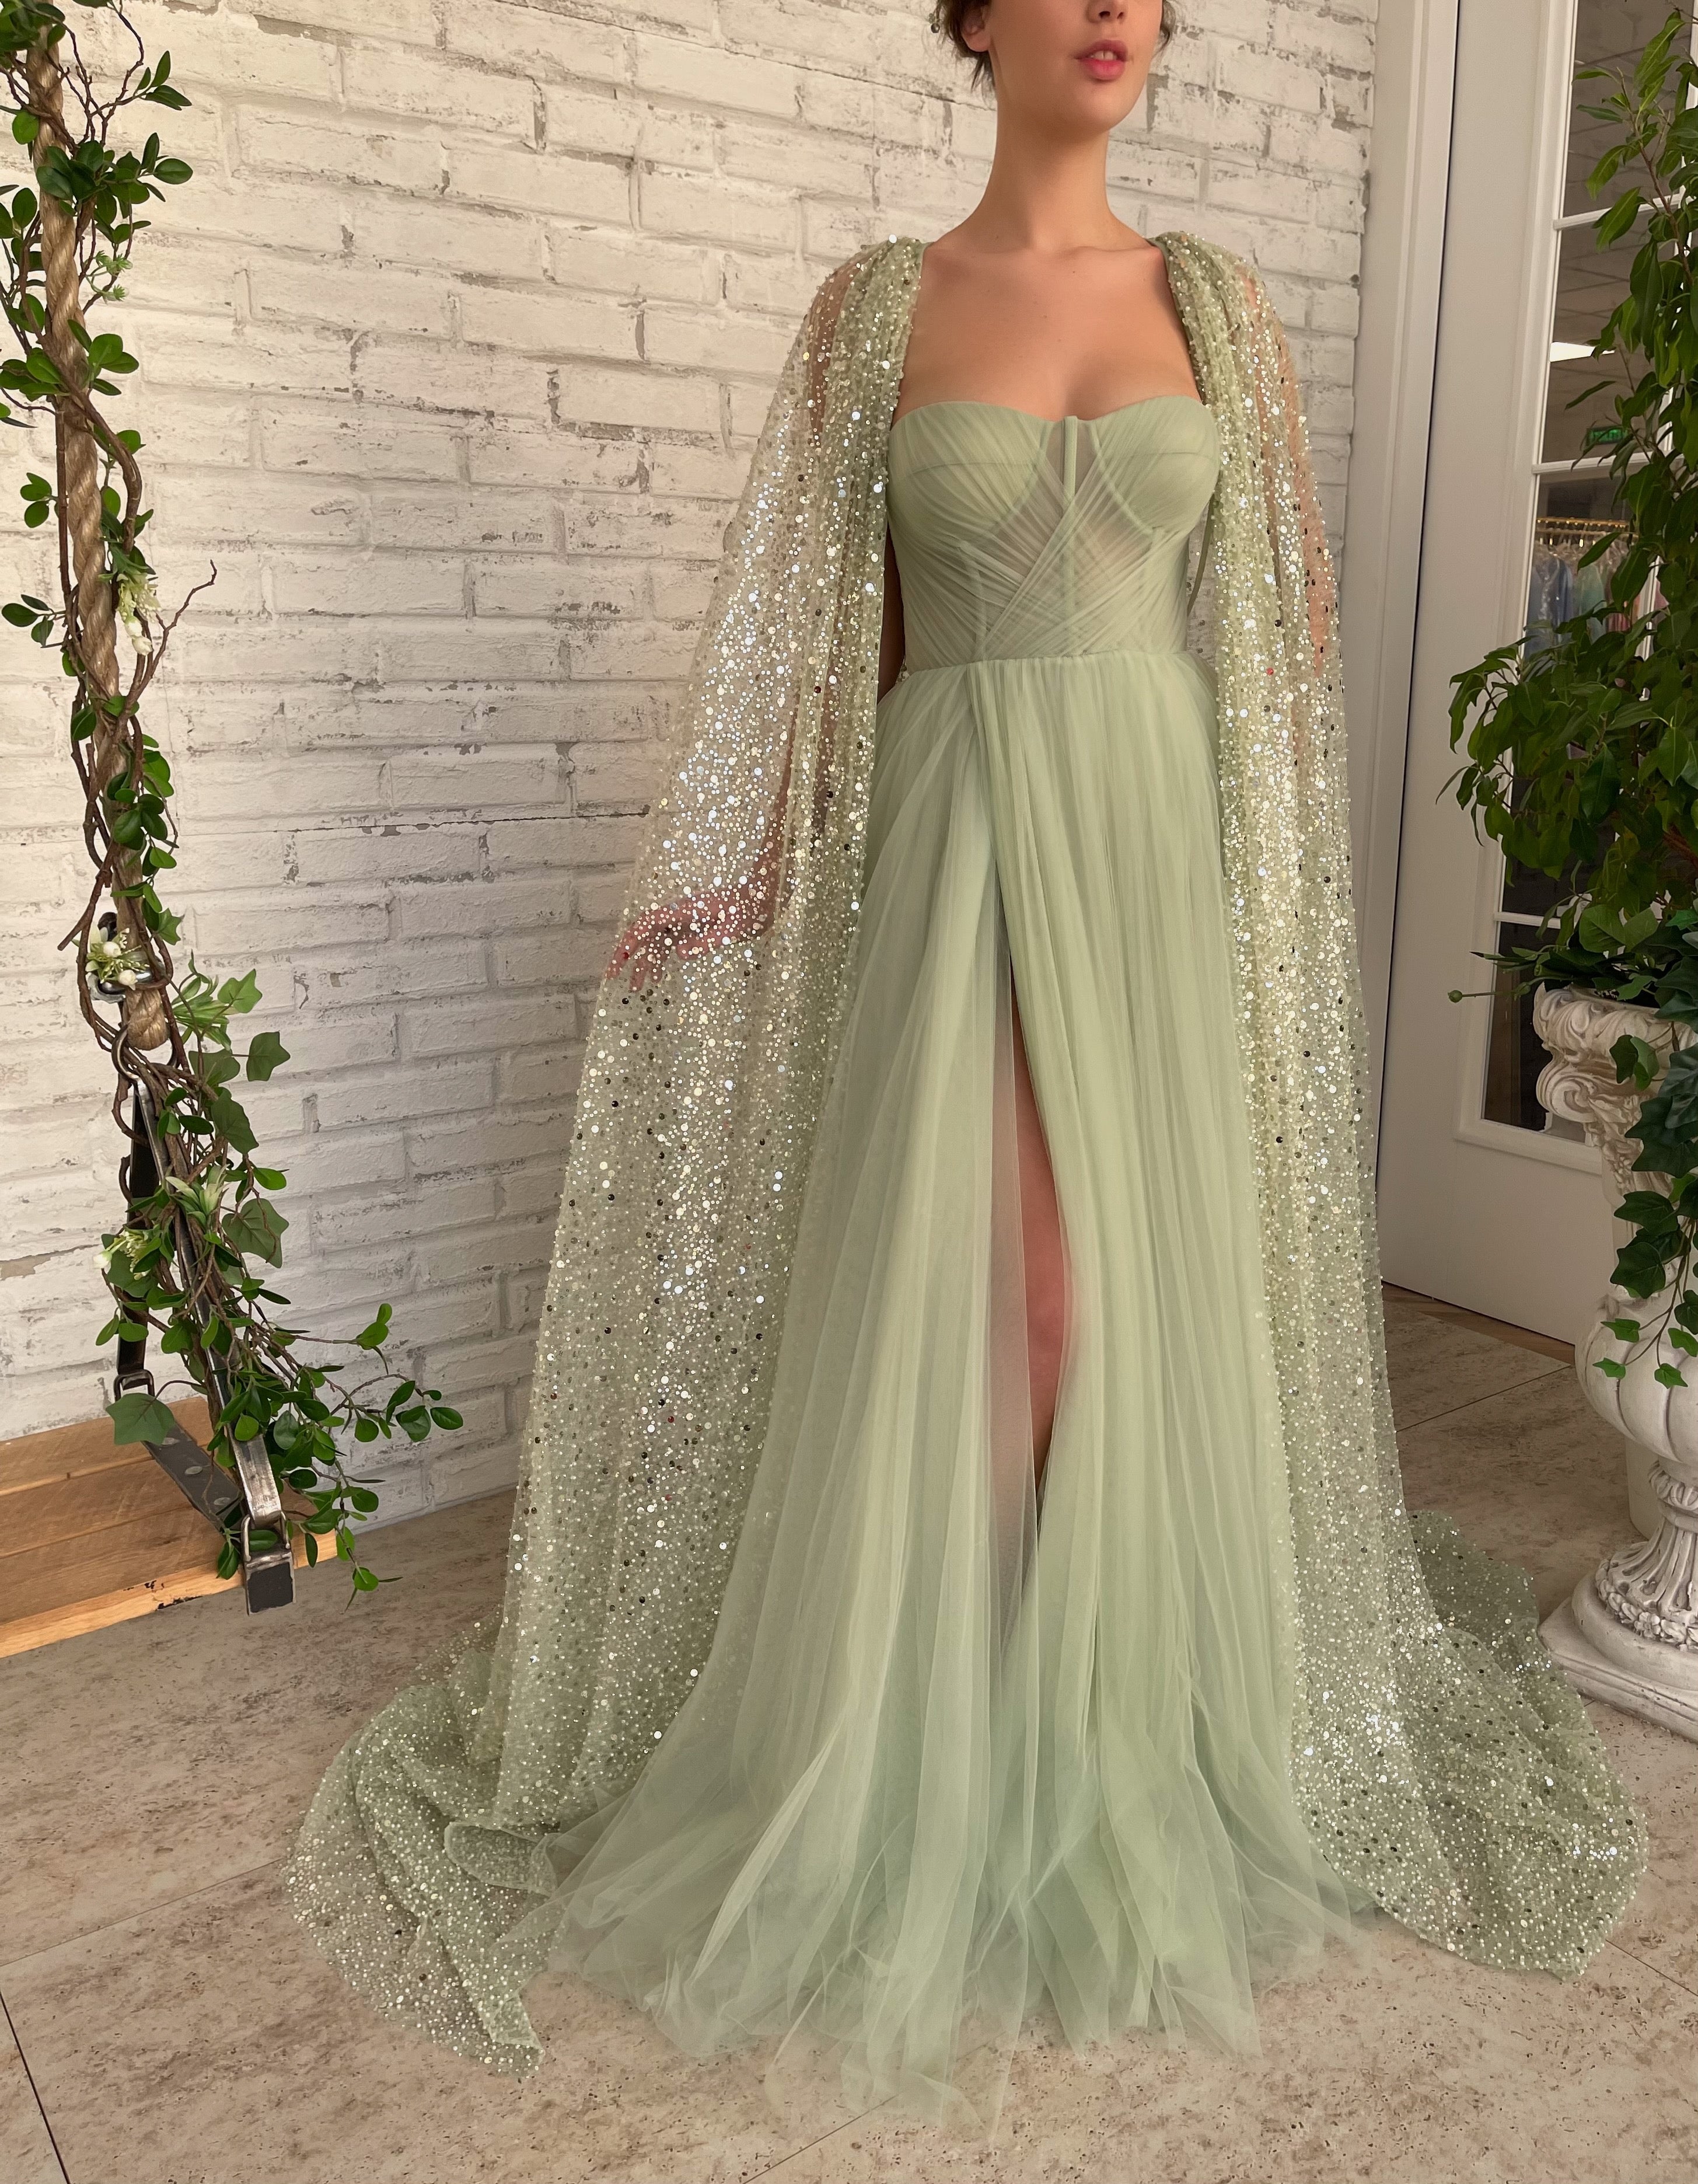 Green A-Line dress with cape sleeves